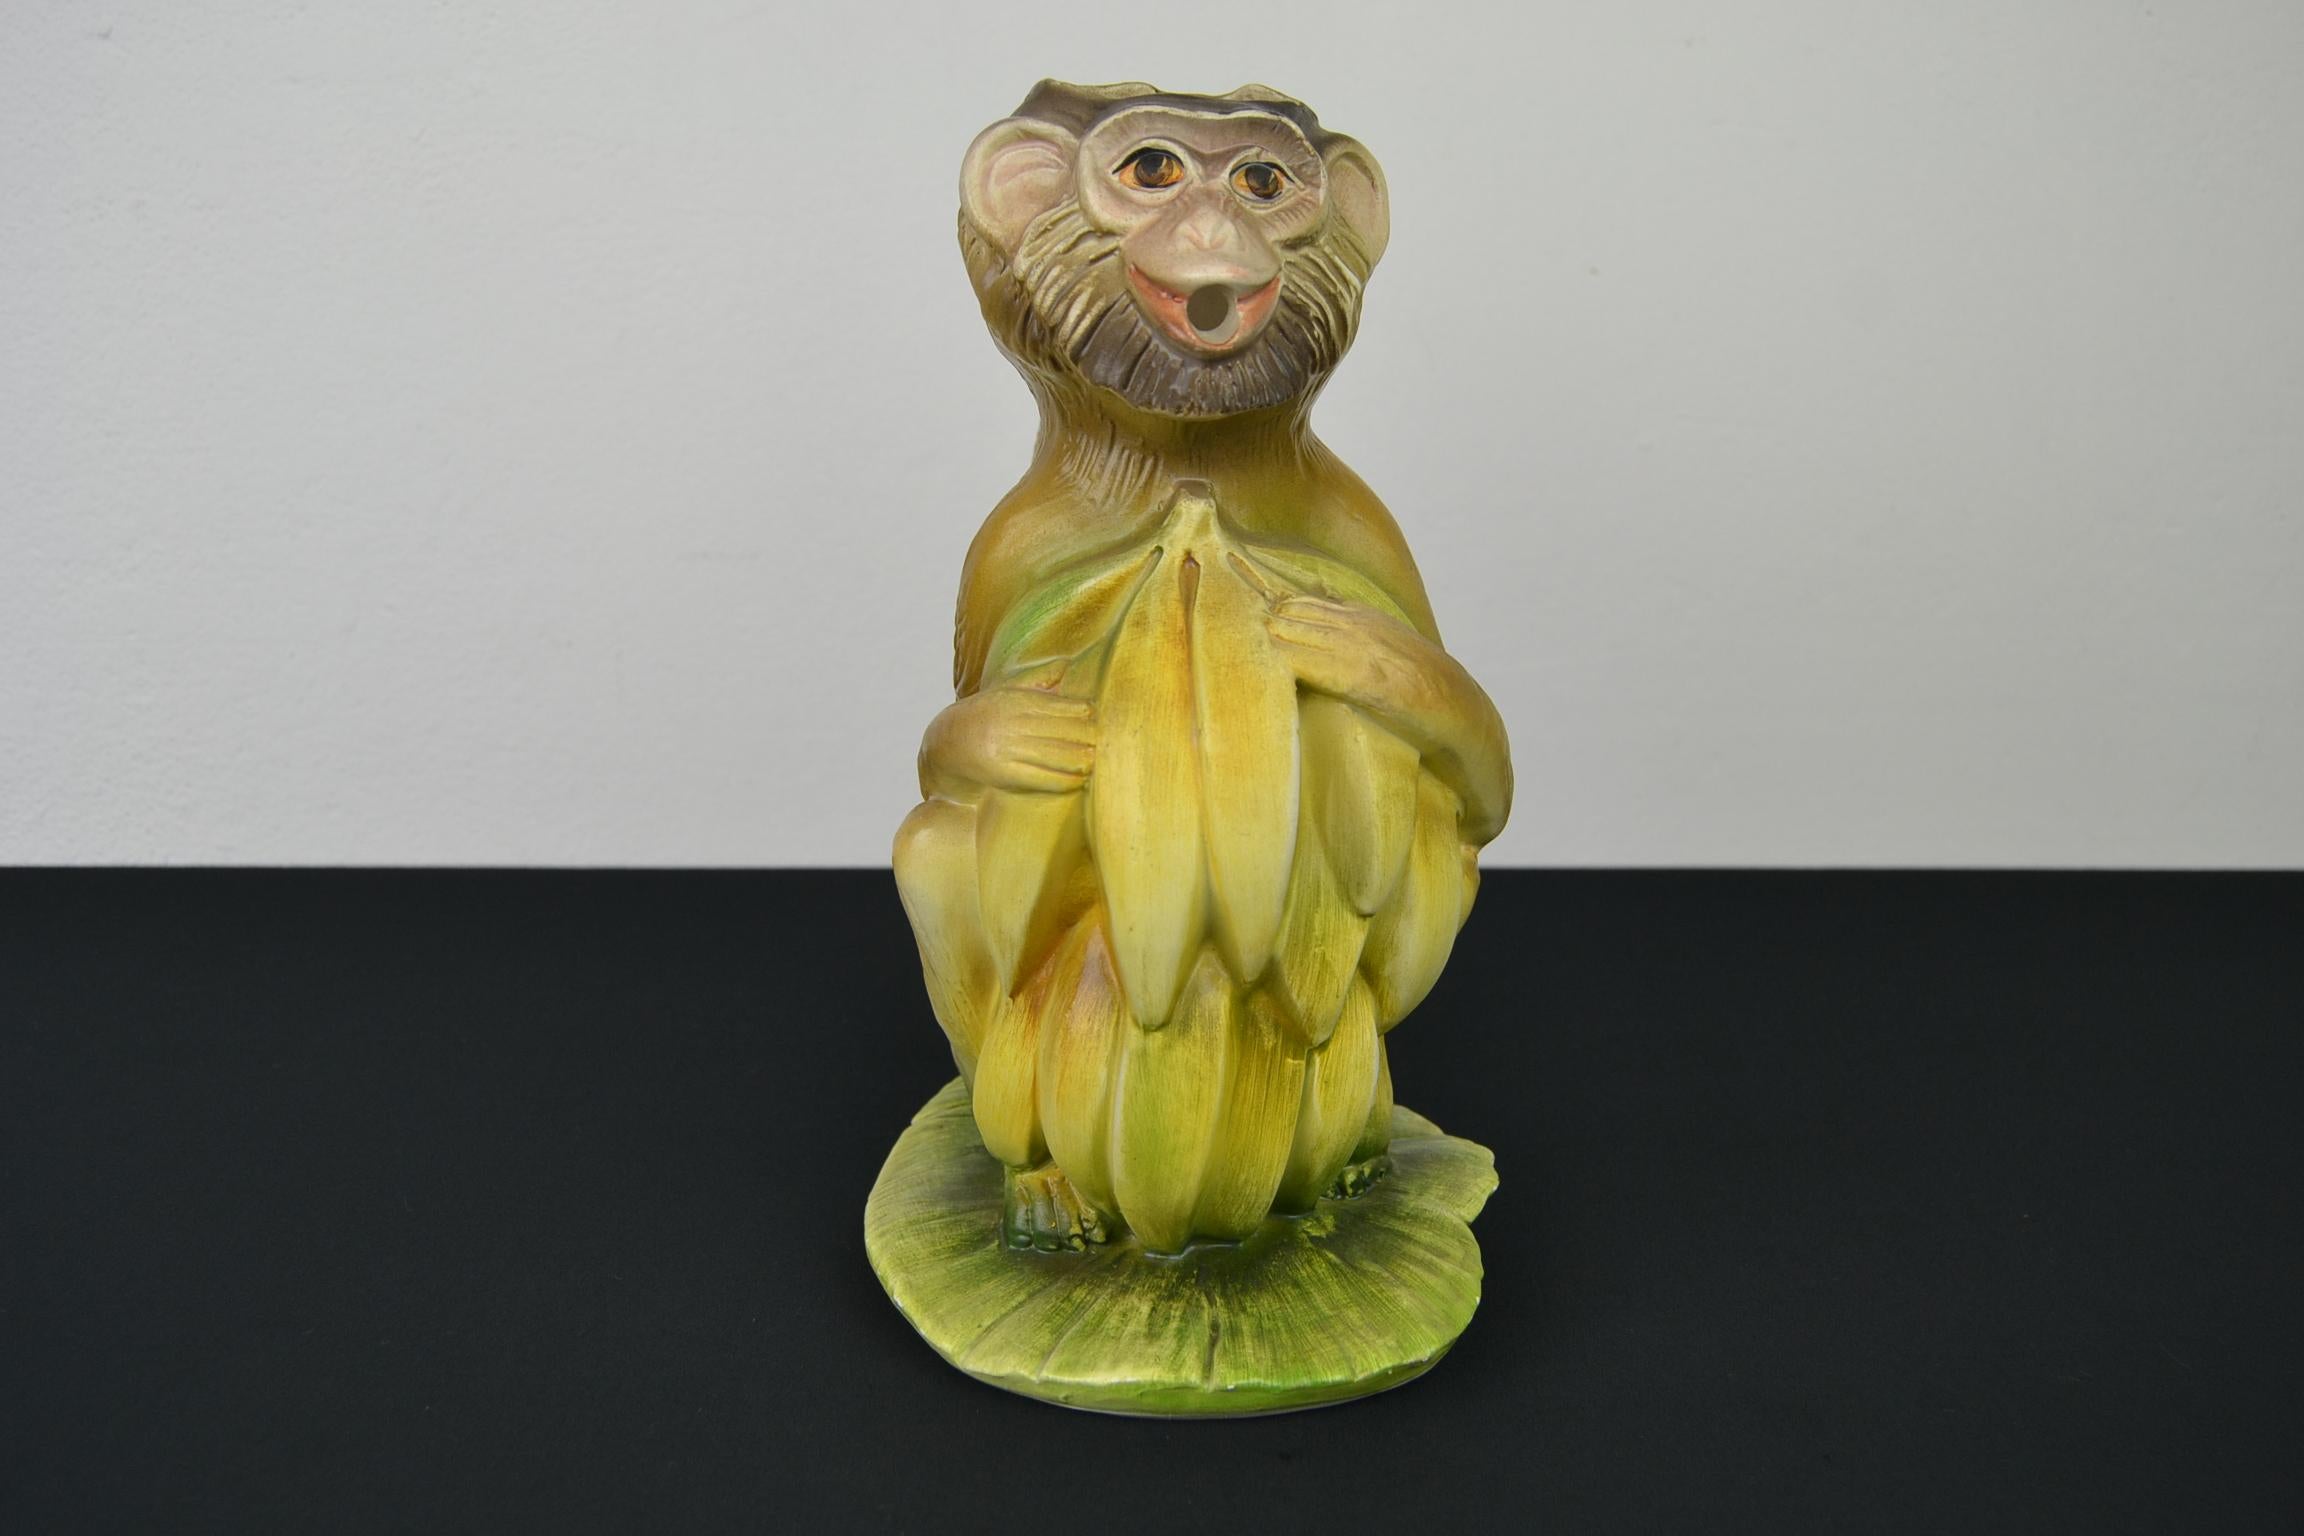 Hand-Painted Vintage Italian Monkey Pitcher with Bananas